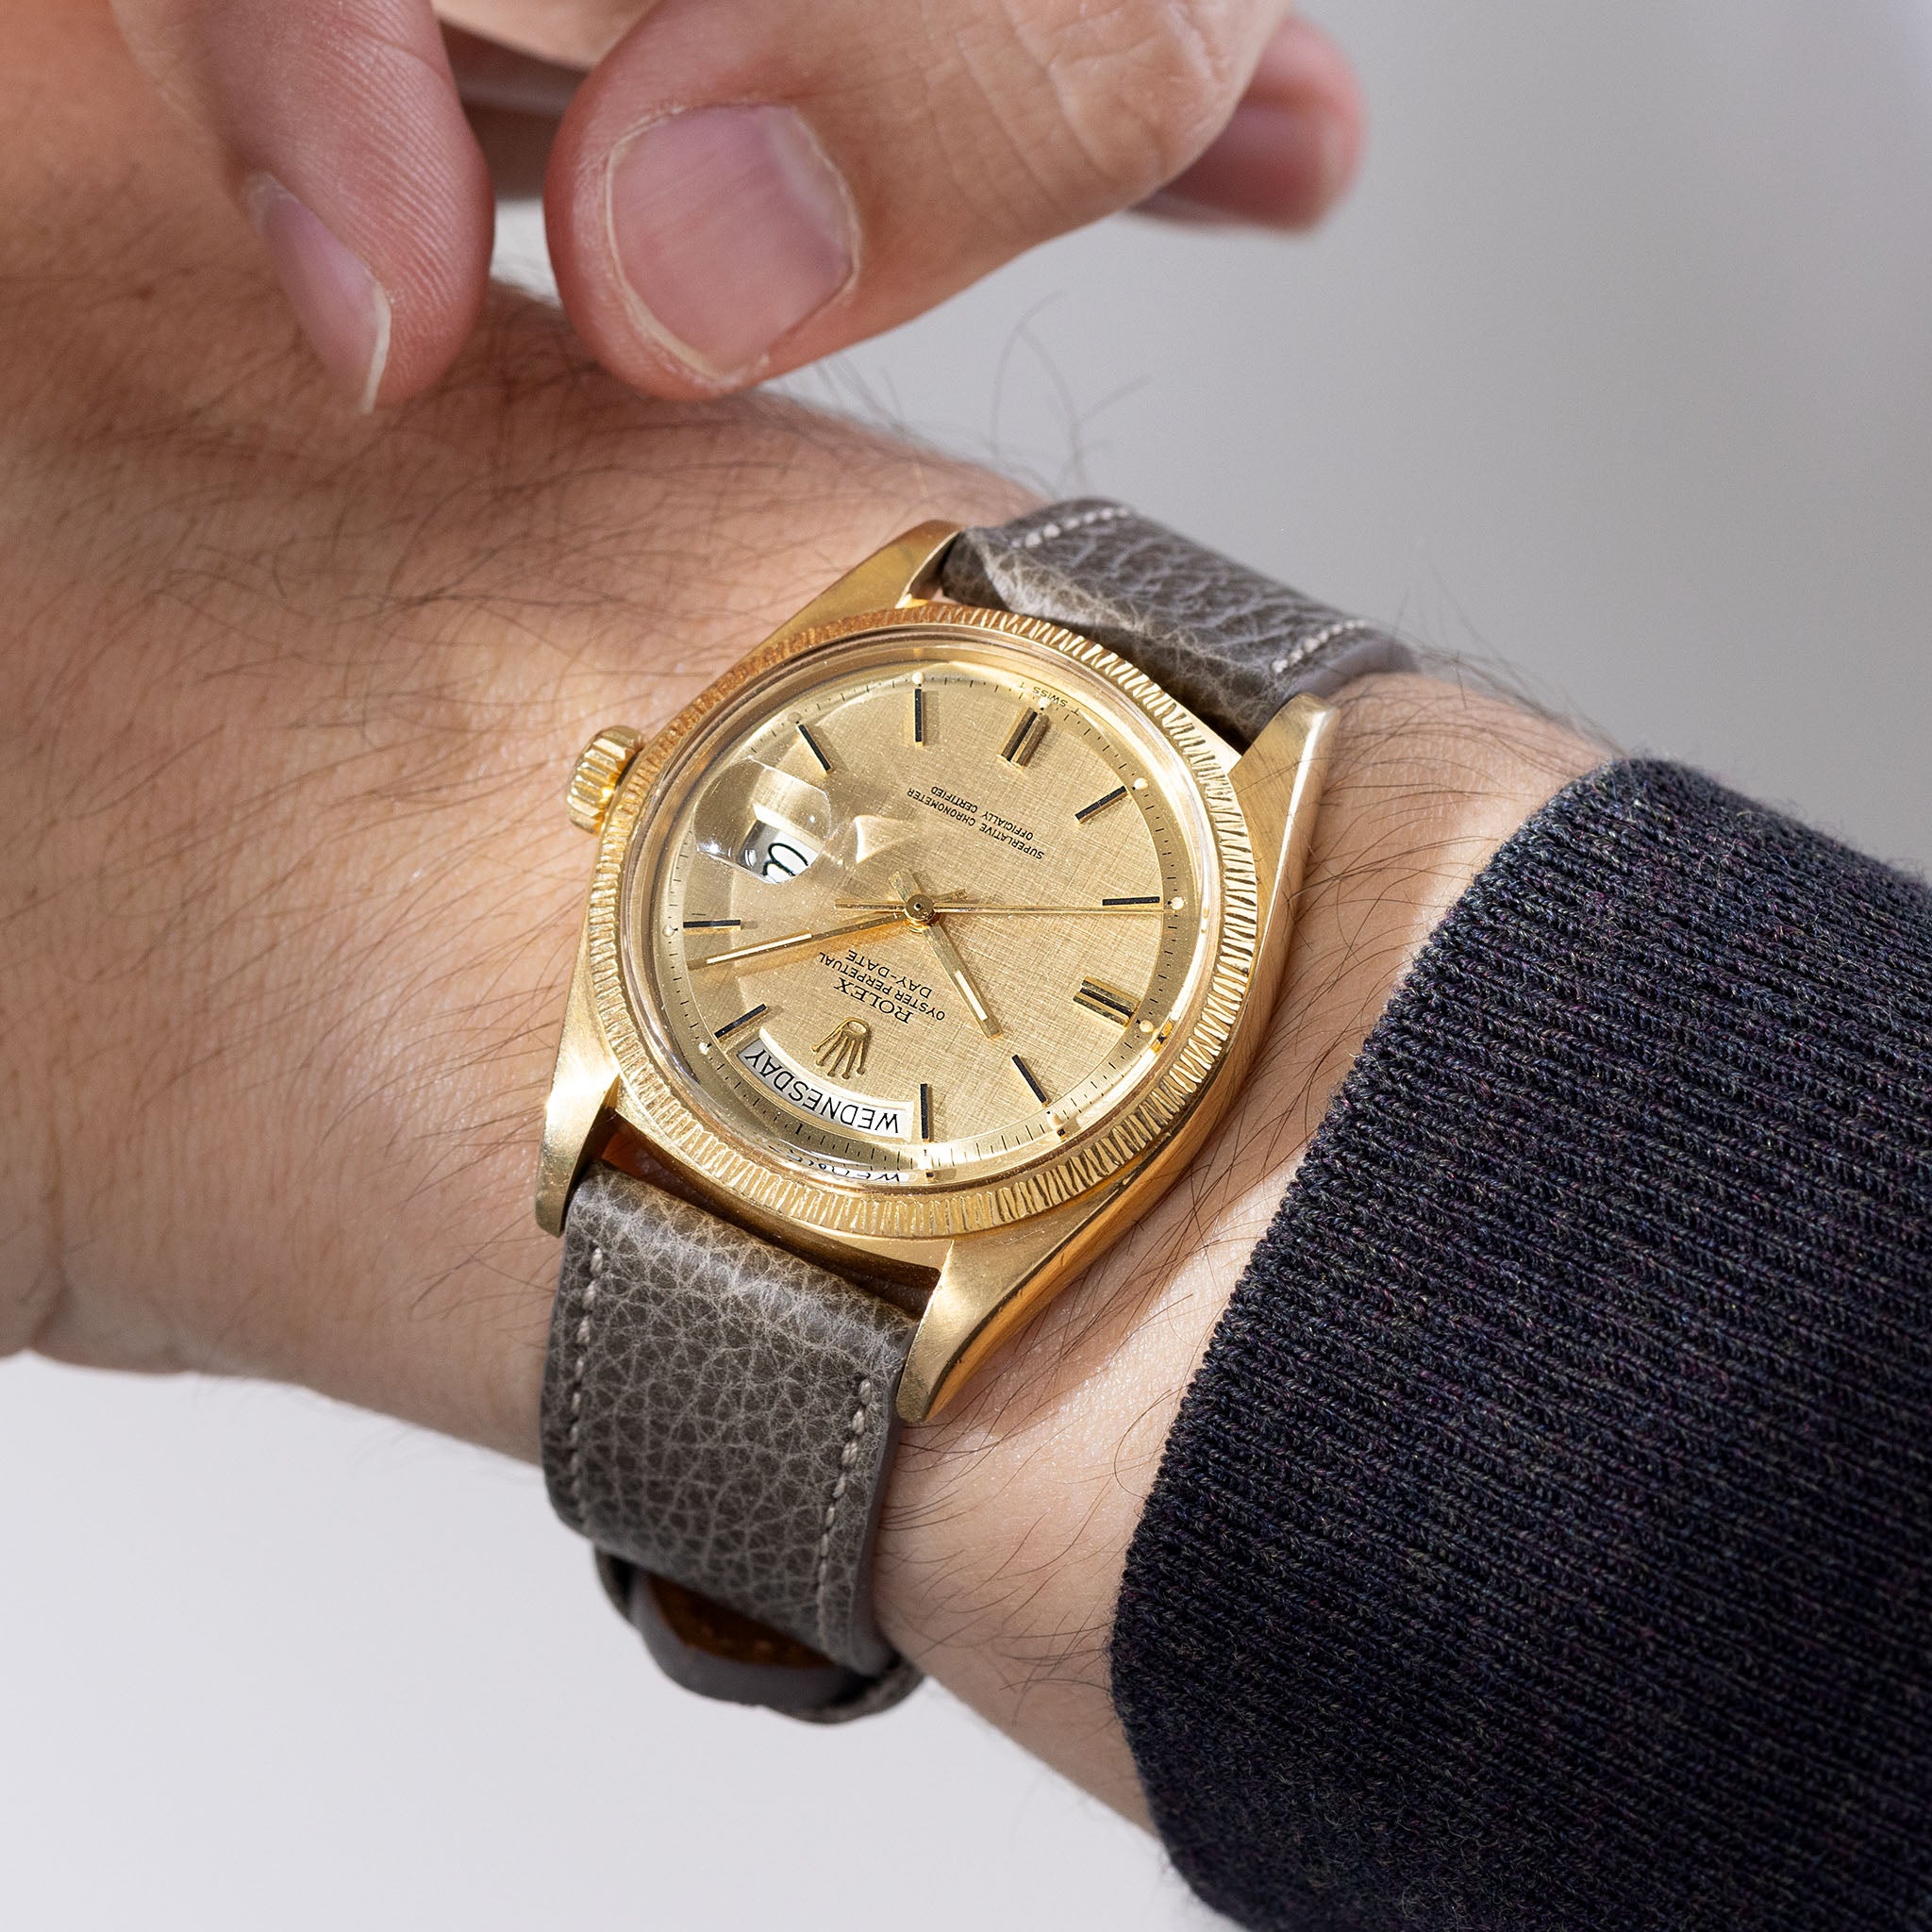 Rolex Day-Date 1807 Bark finish with gold Linen dial - incoming